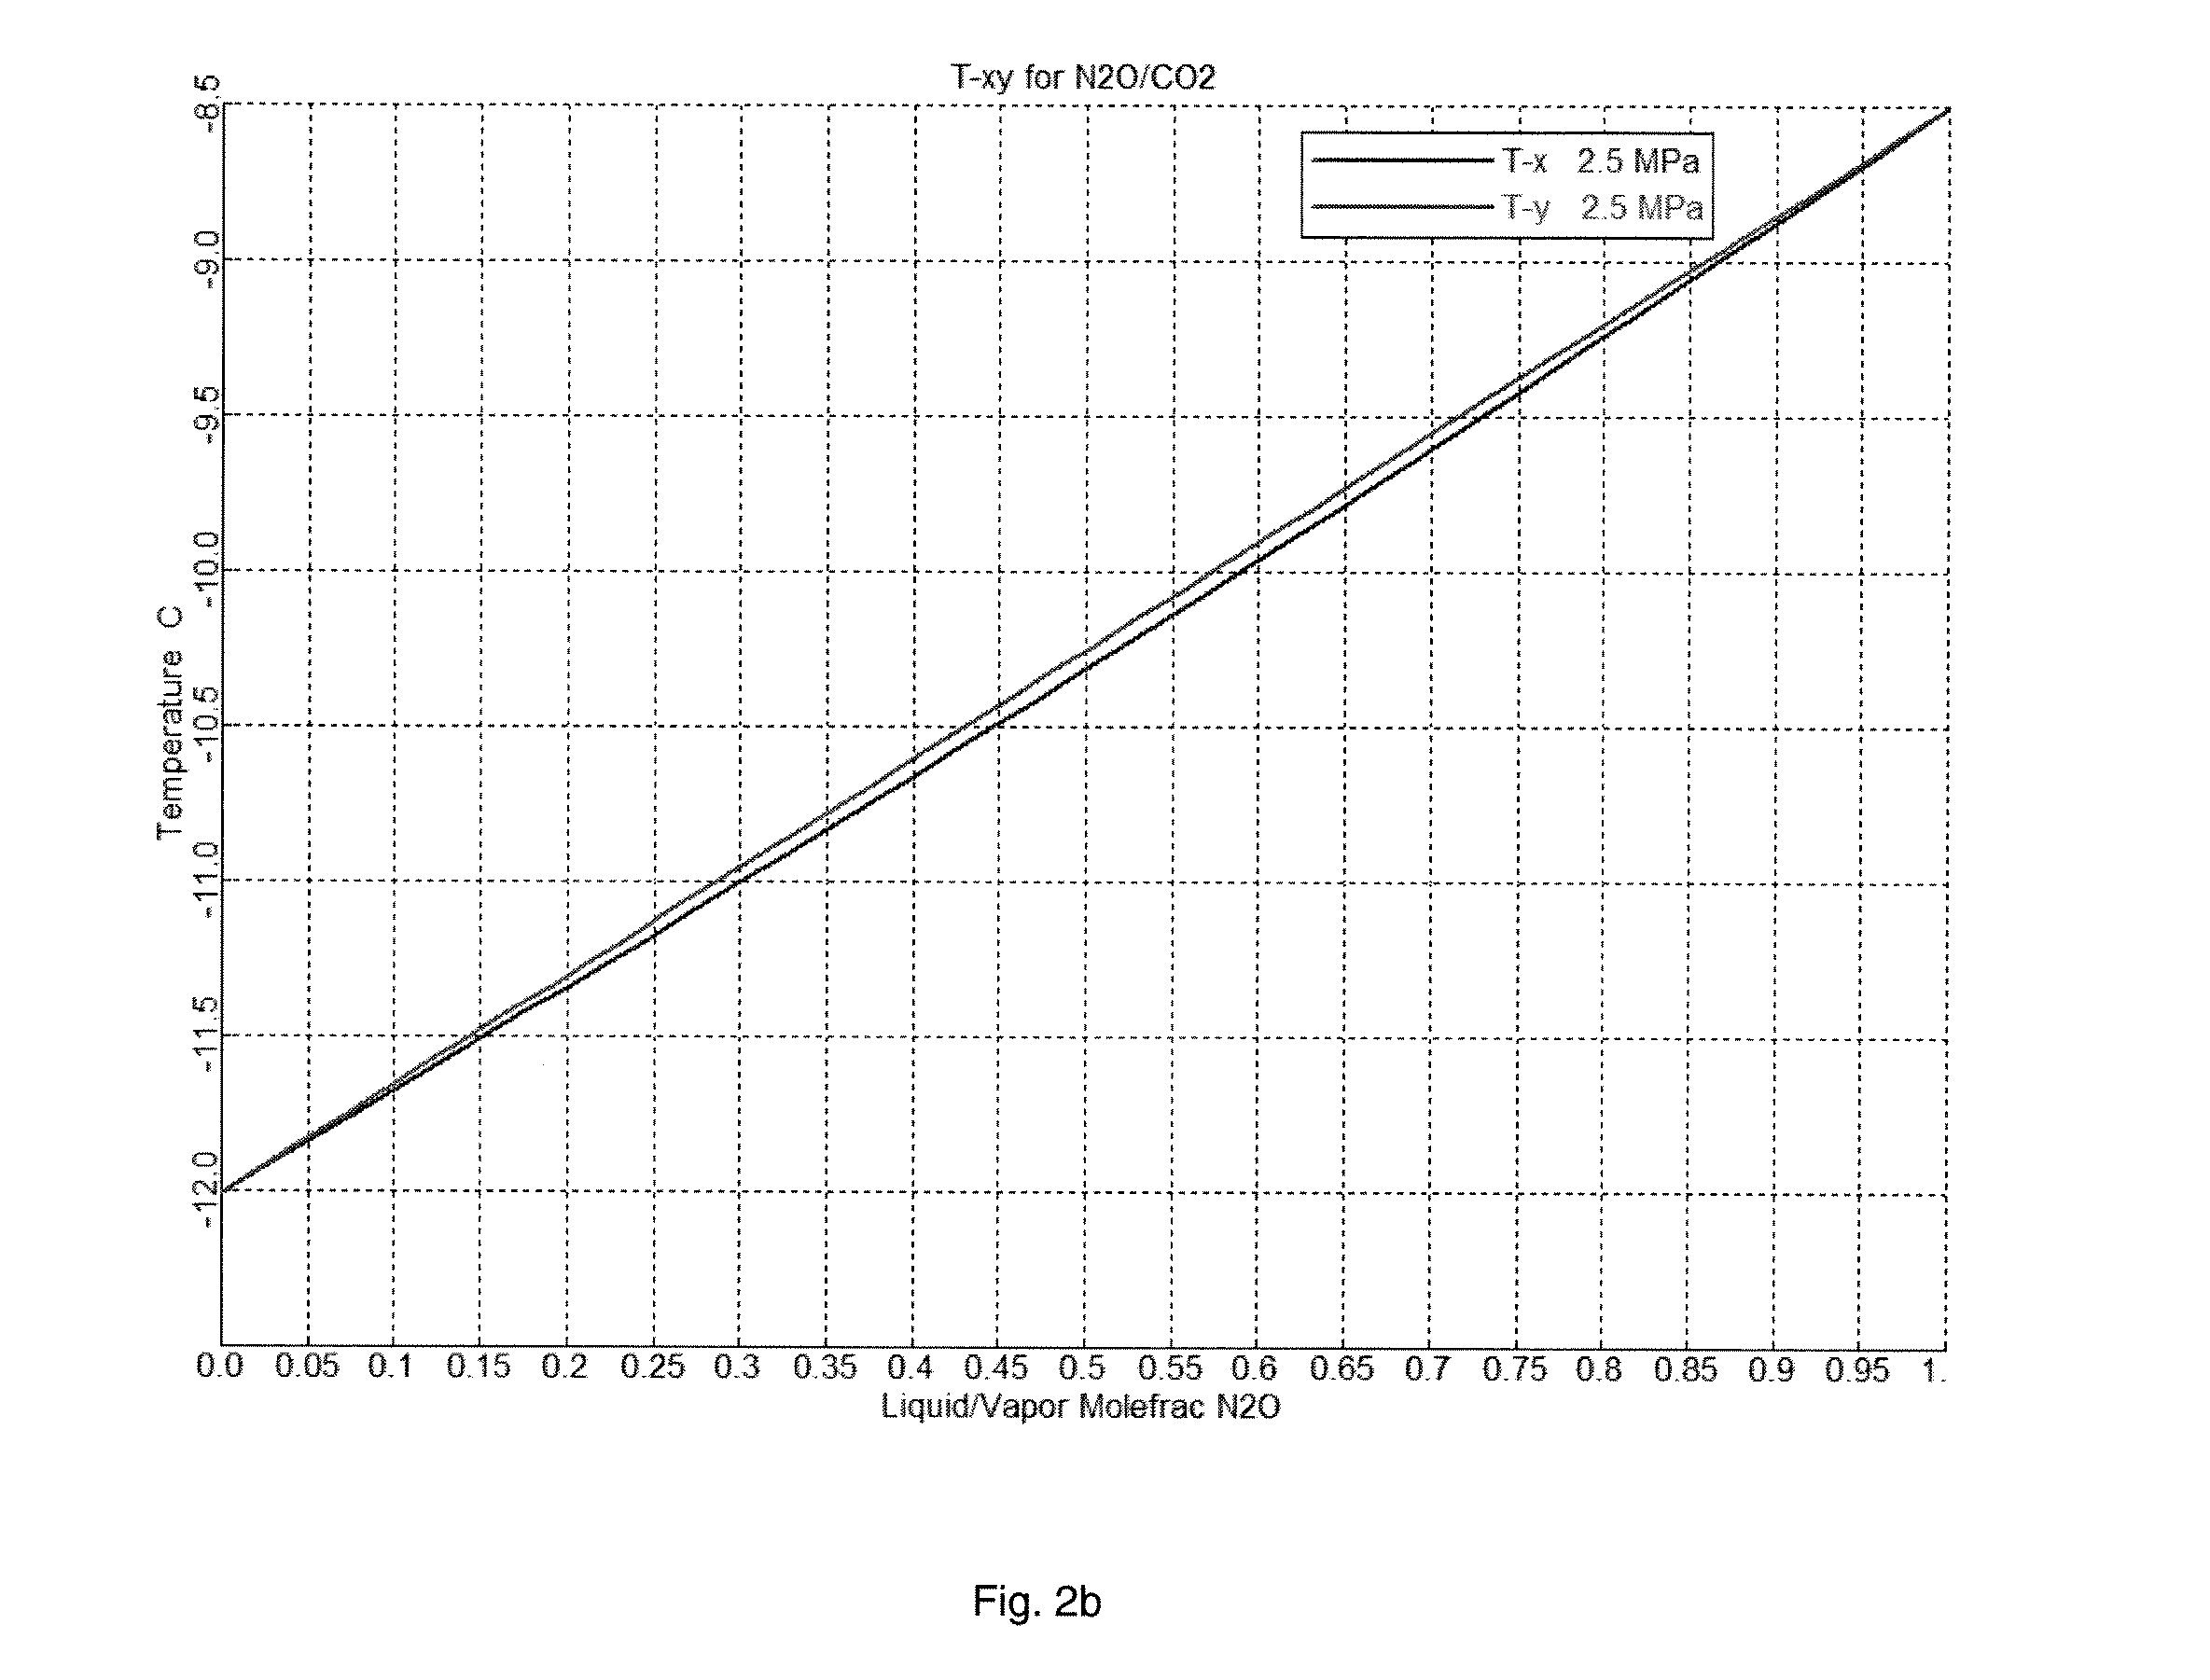 Process for Recovery and Purification of Nitrous Oxide